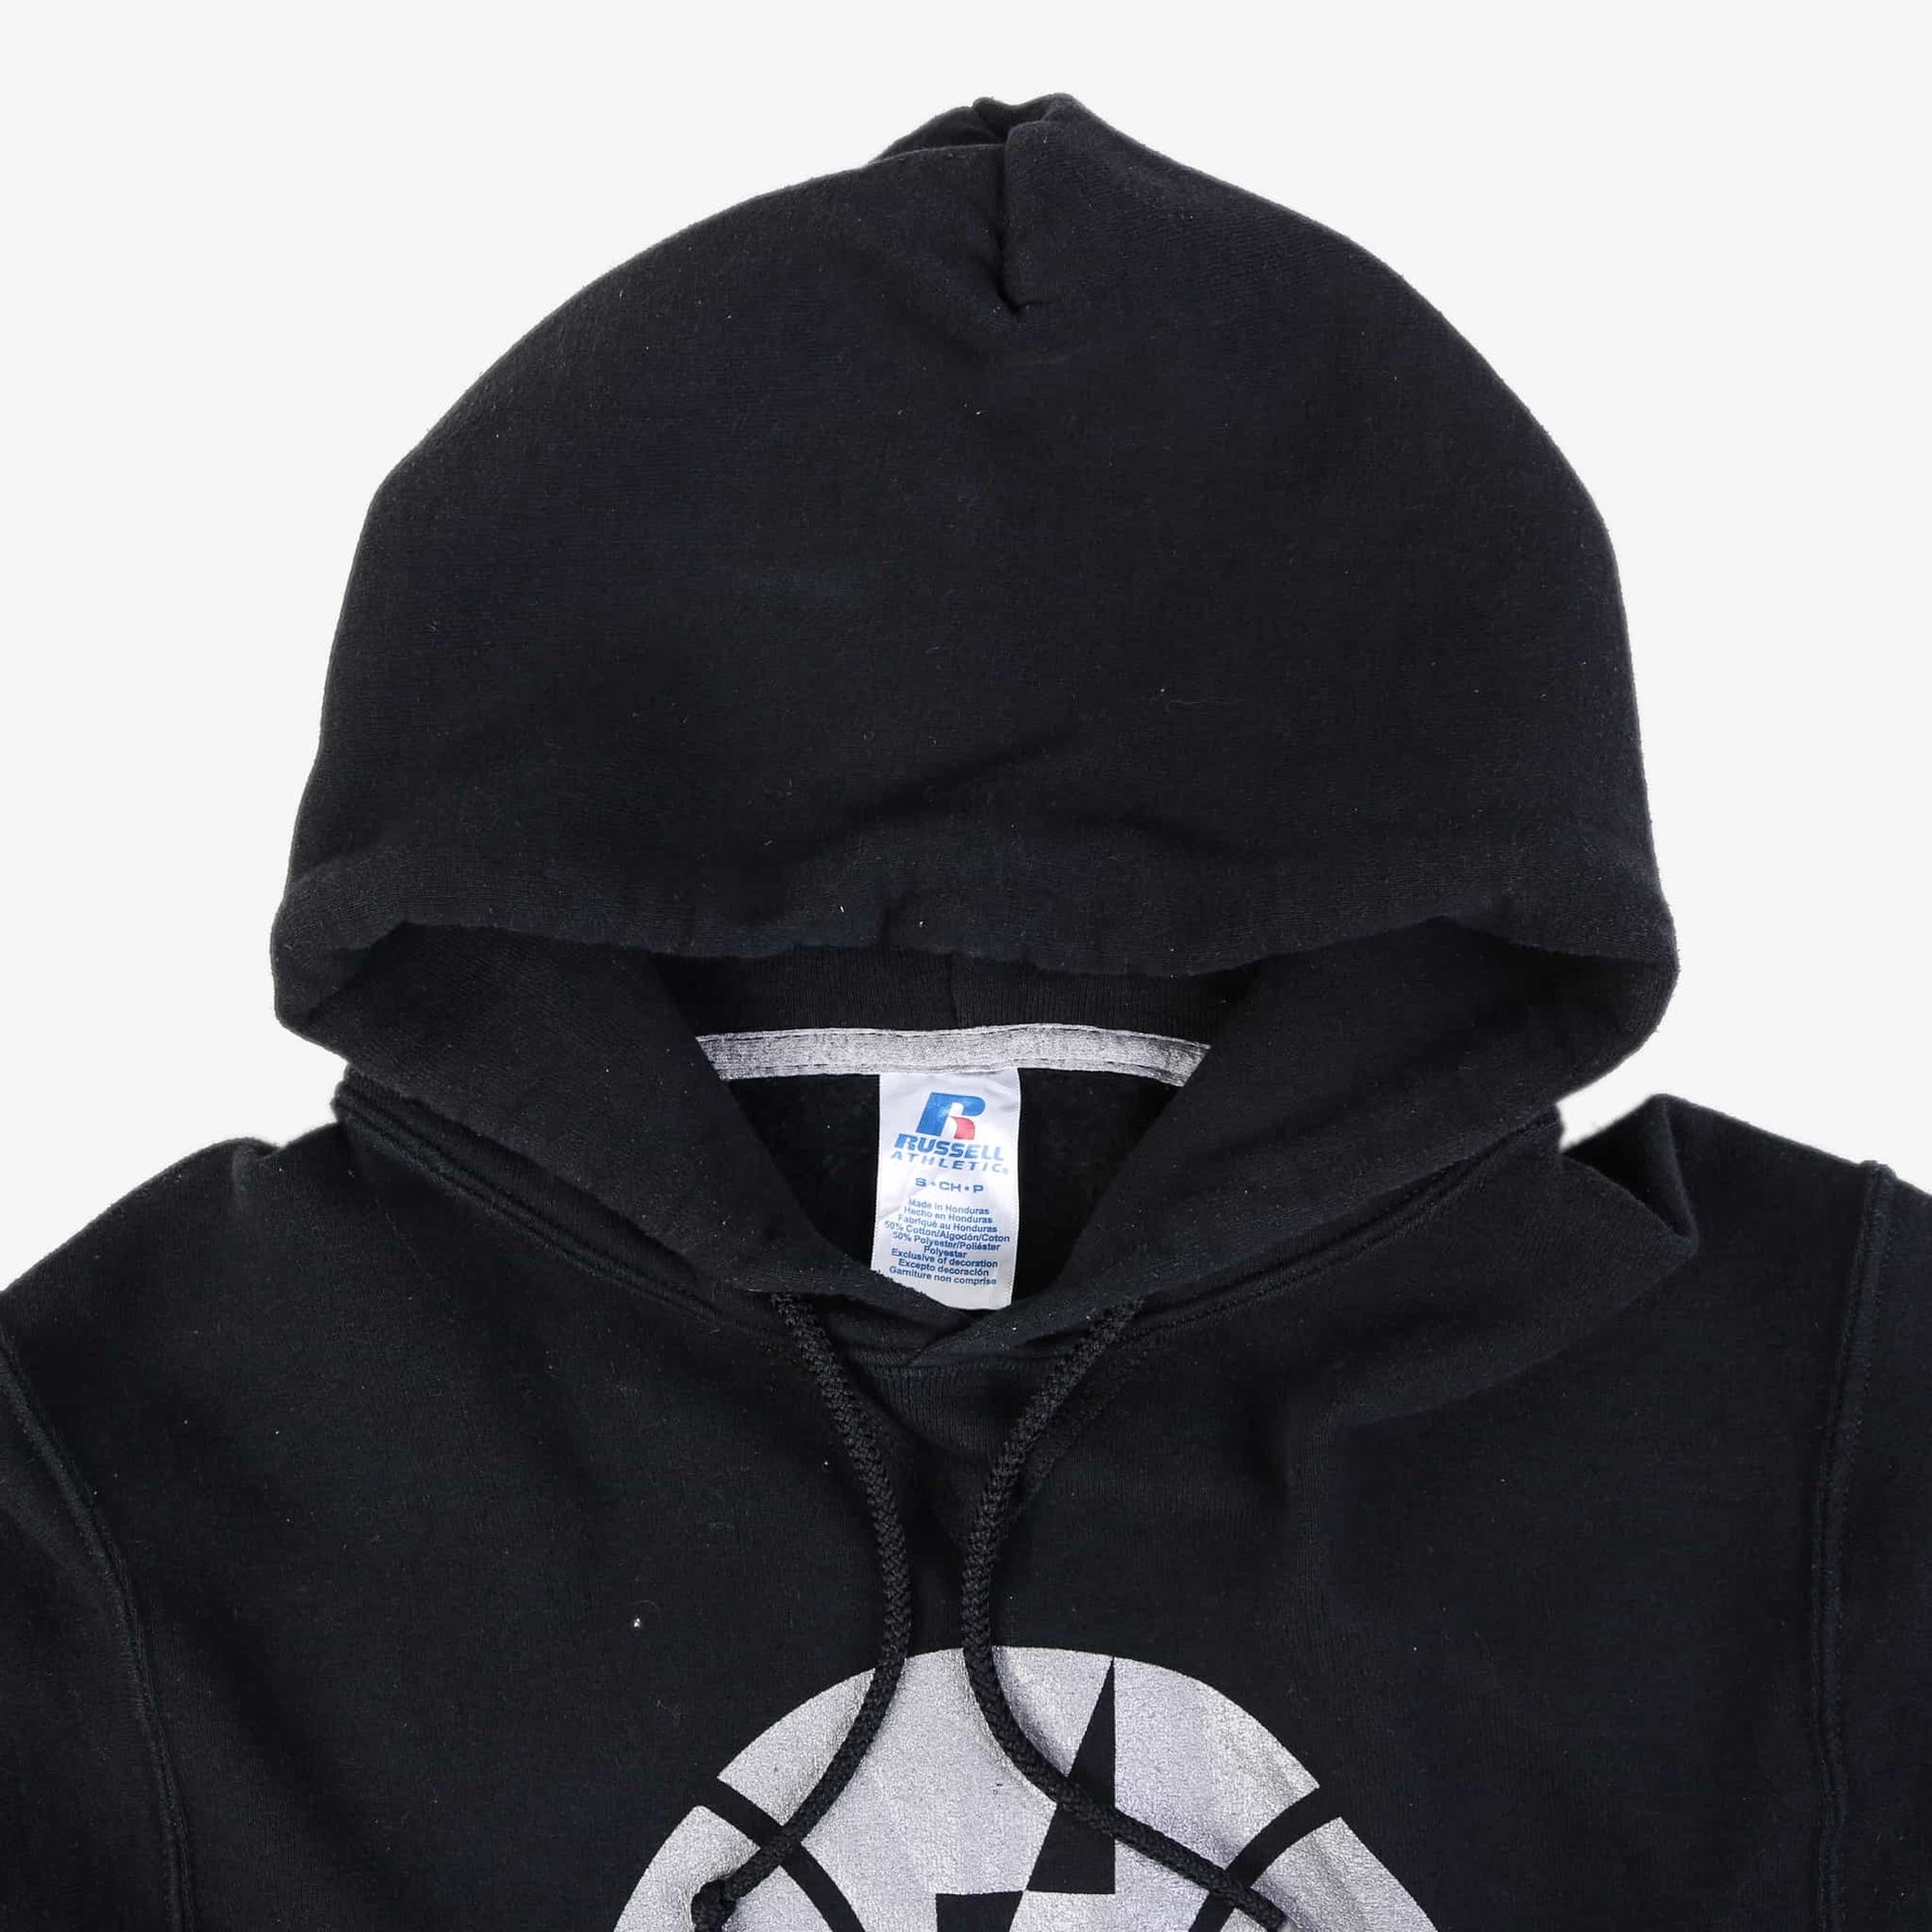 Vintage Russell Athletic 'Normal Park Basketball' Hooded Sweatshirt - Black - American Madness